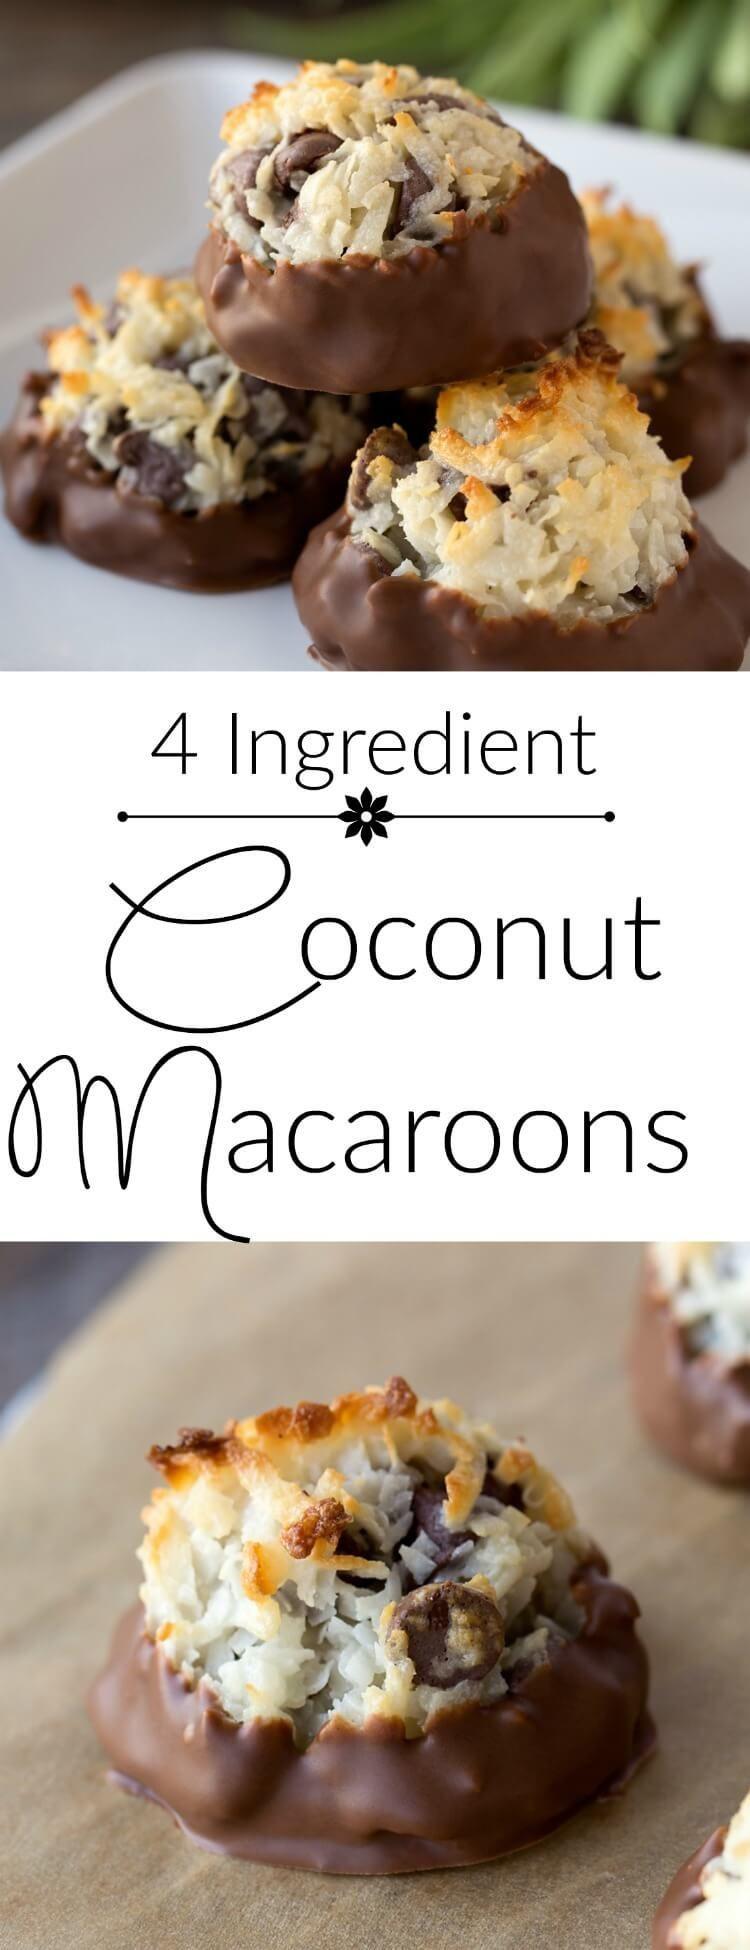 Passover Coconut Macaroons
 Coconut Macaroons Recipe only four ingre nts and